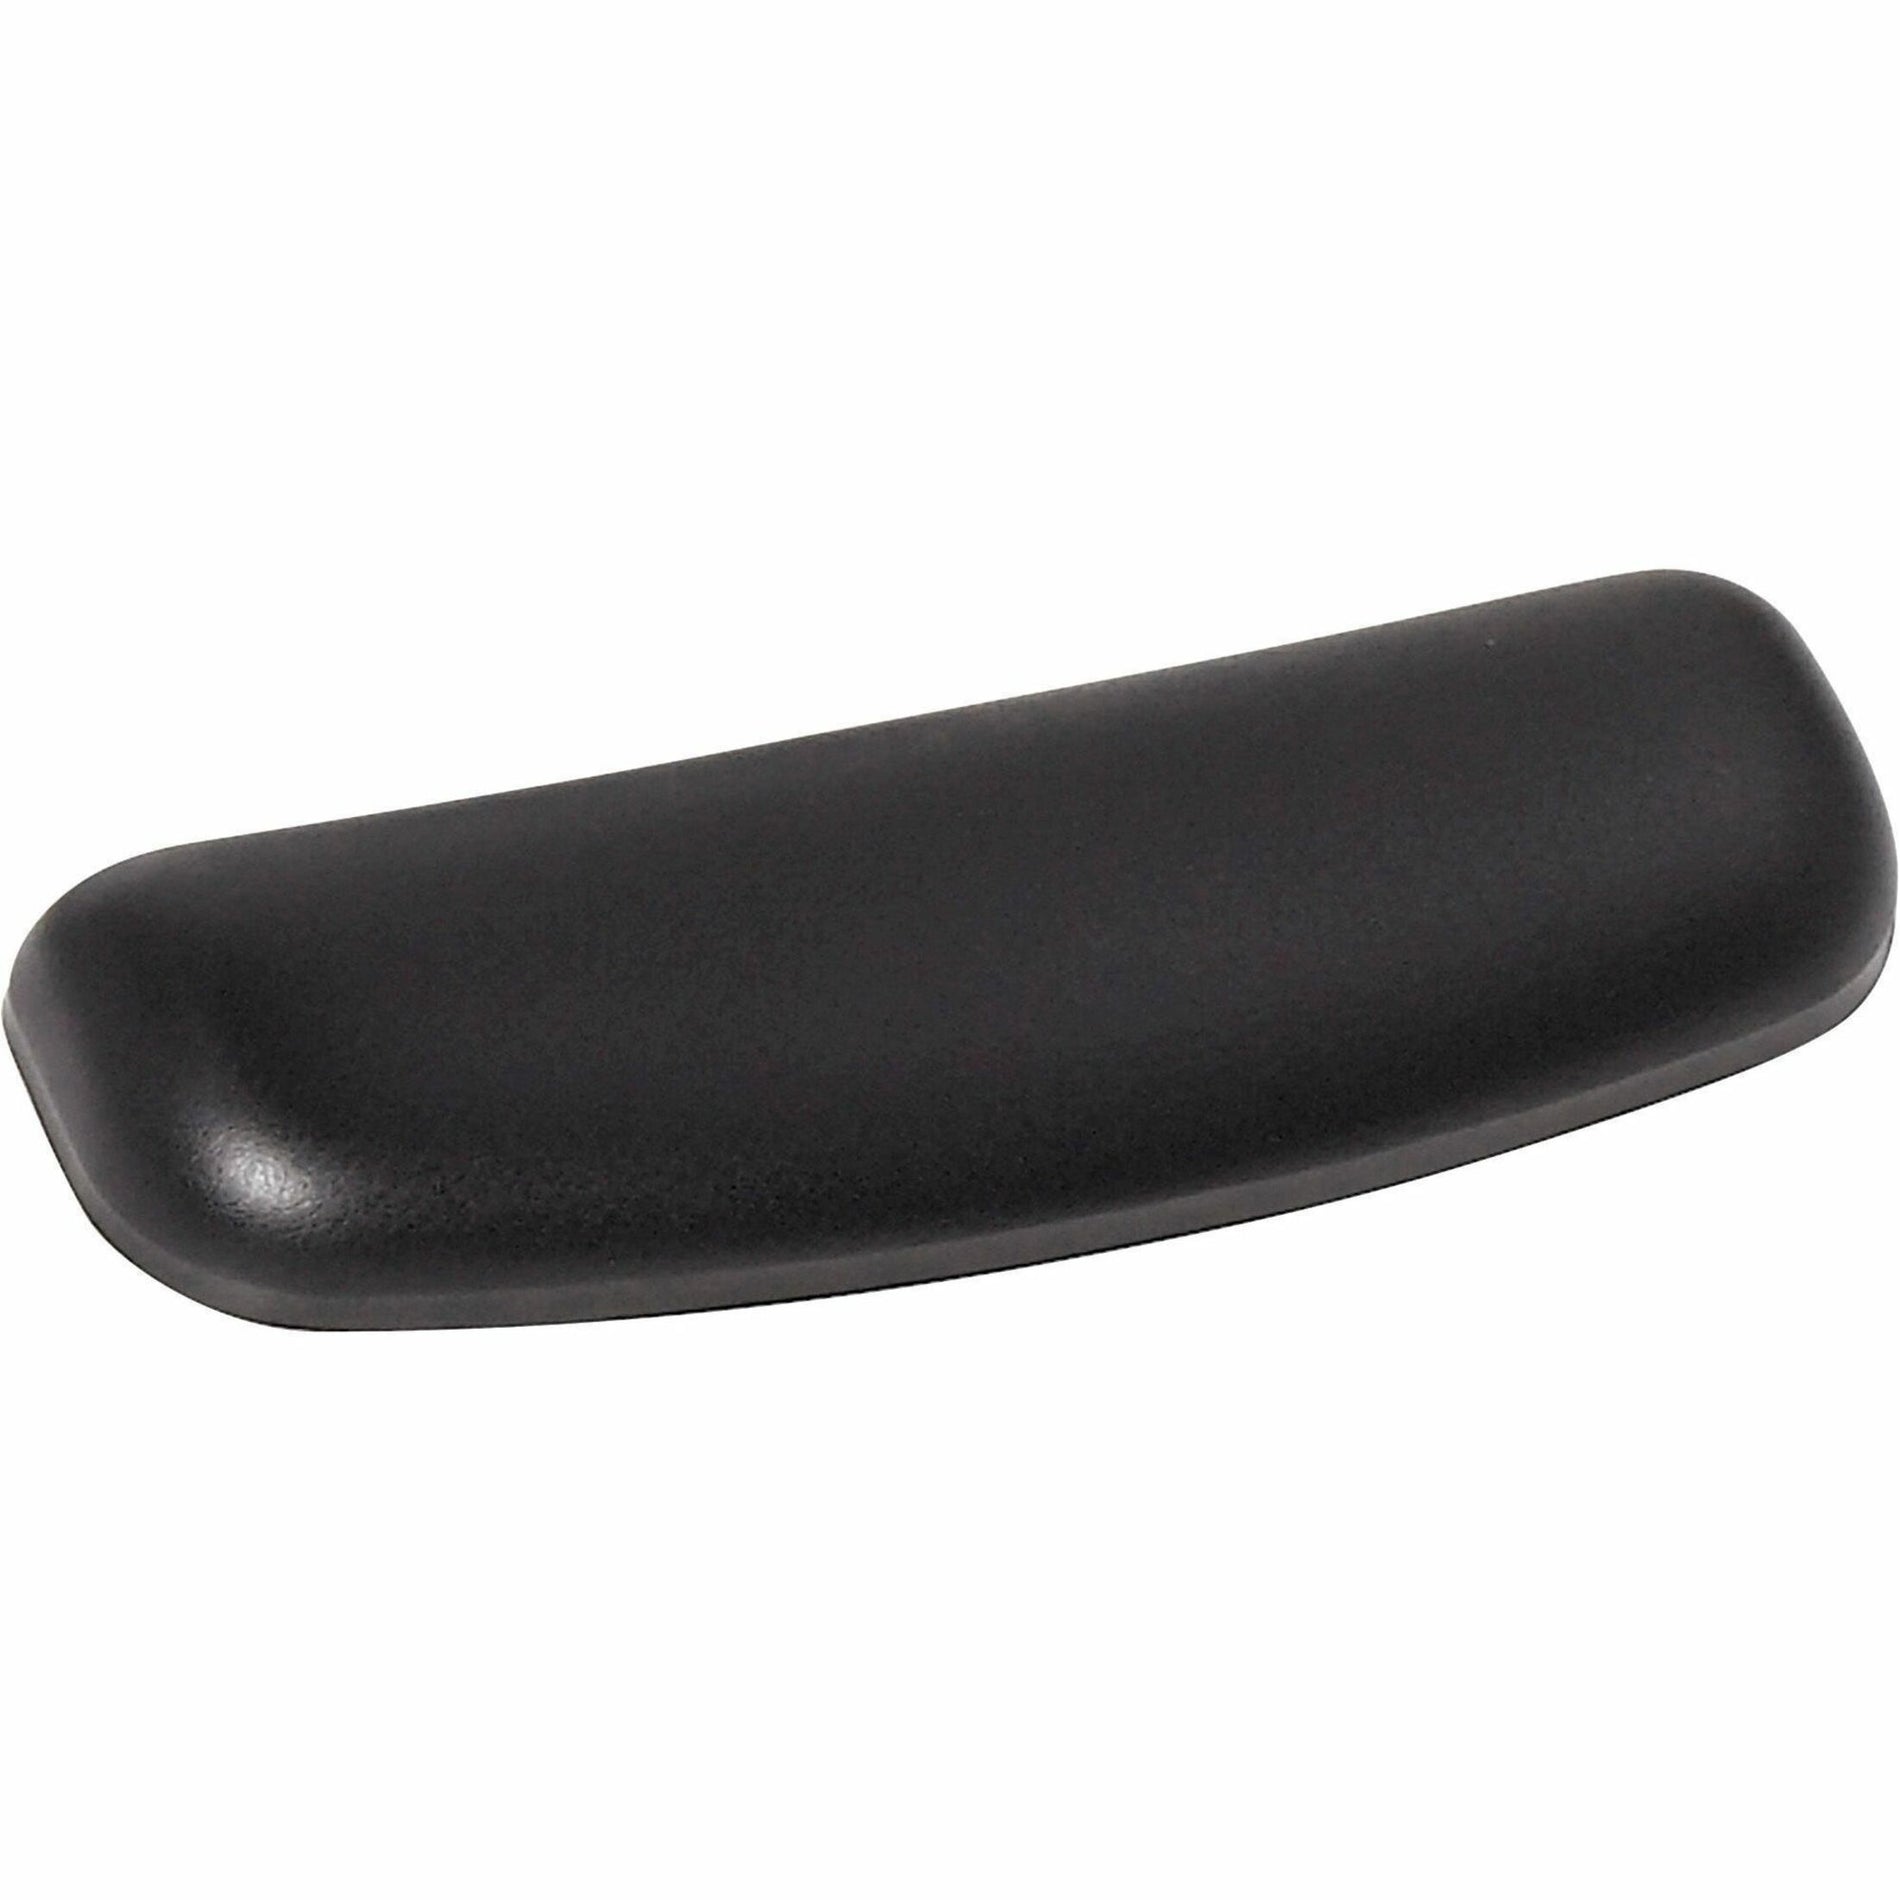 3M Gel Wrist Rest - Ergonomic Support for Comfortable Typing [Discontinued]